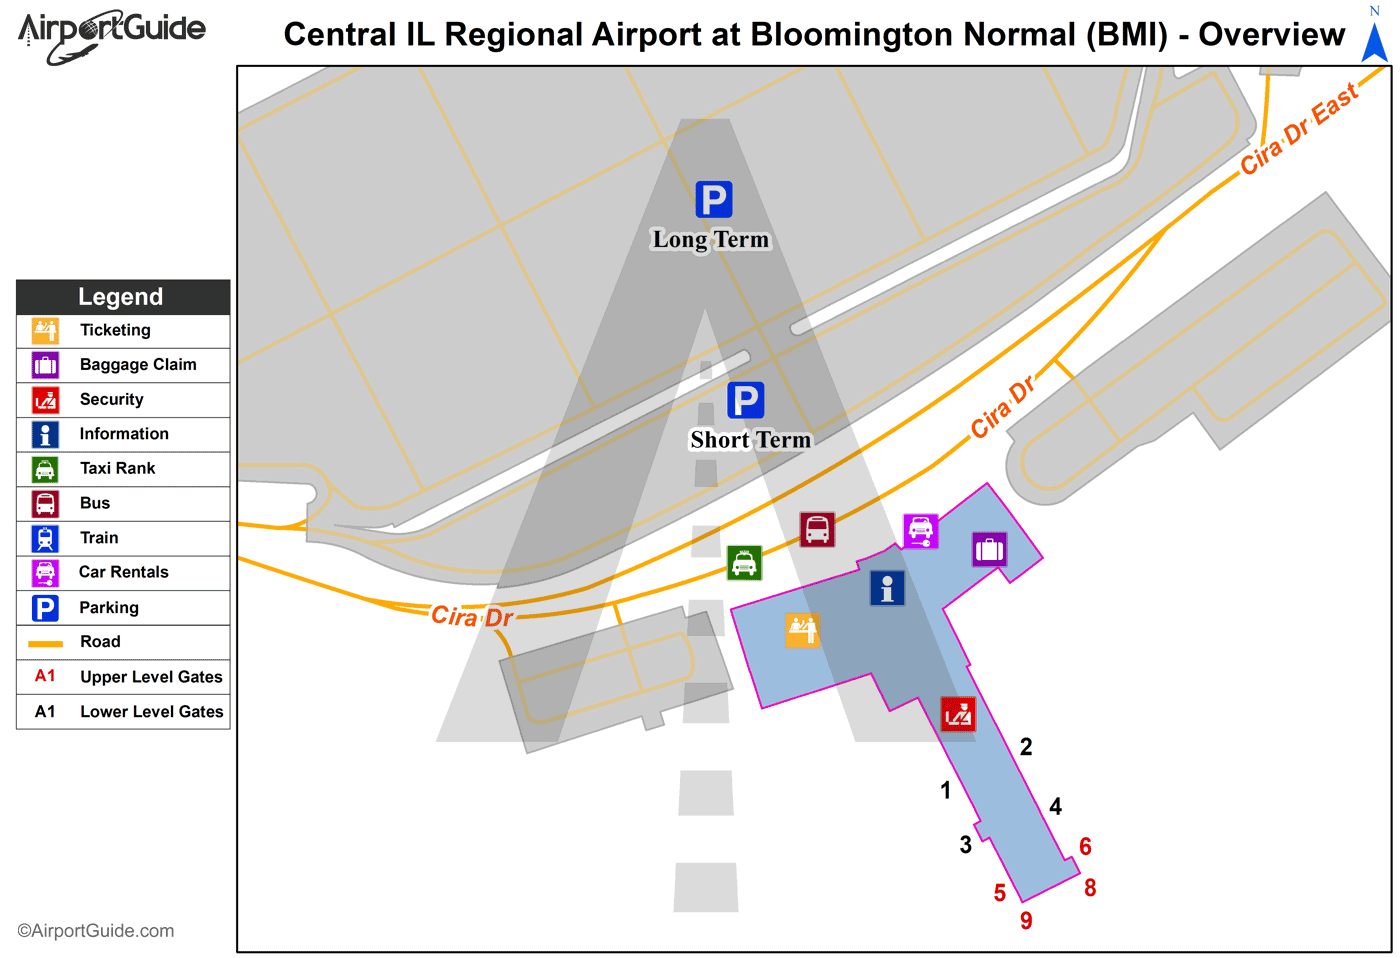 Bloomington Normal Central Il Regional Airport At Bloomington